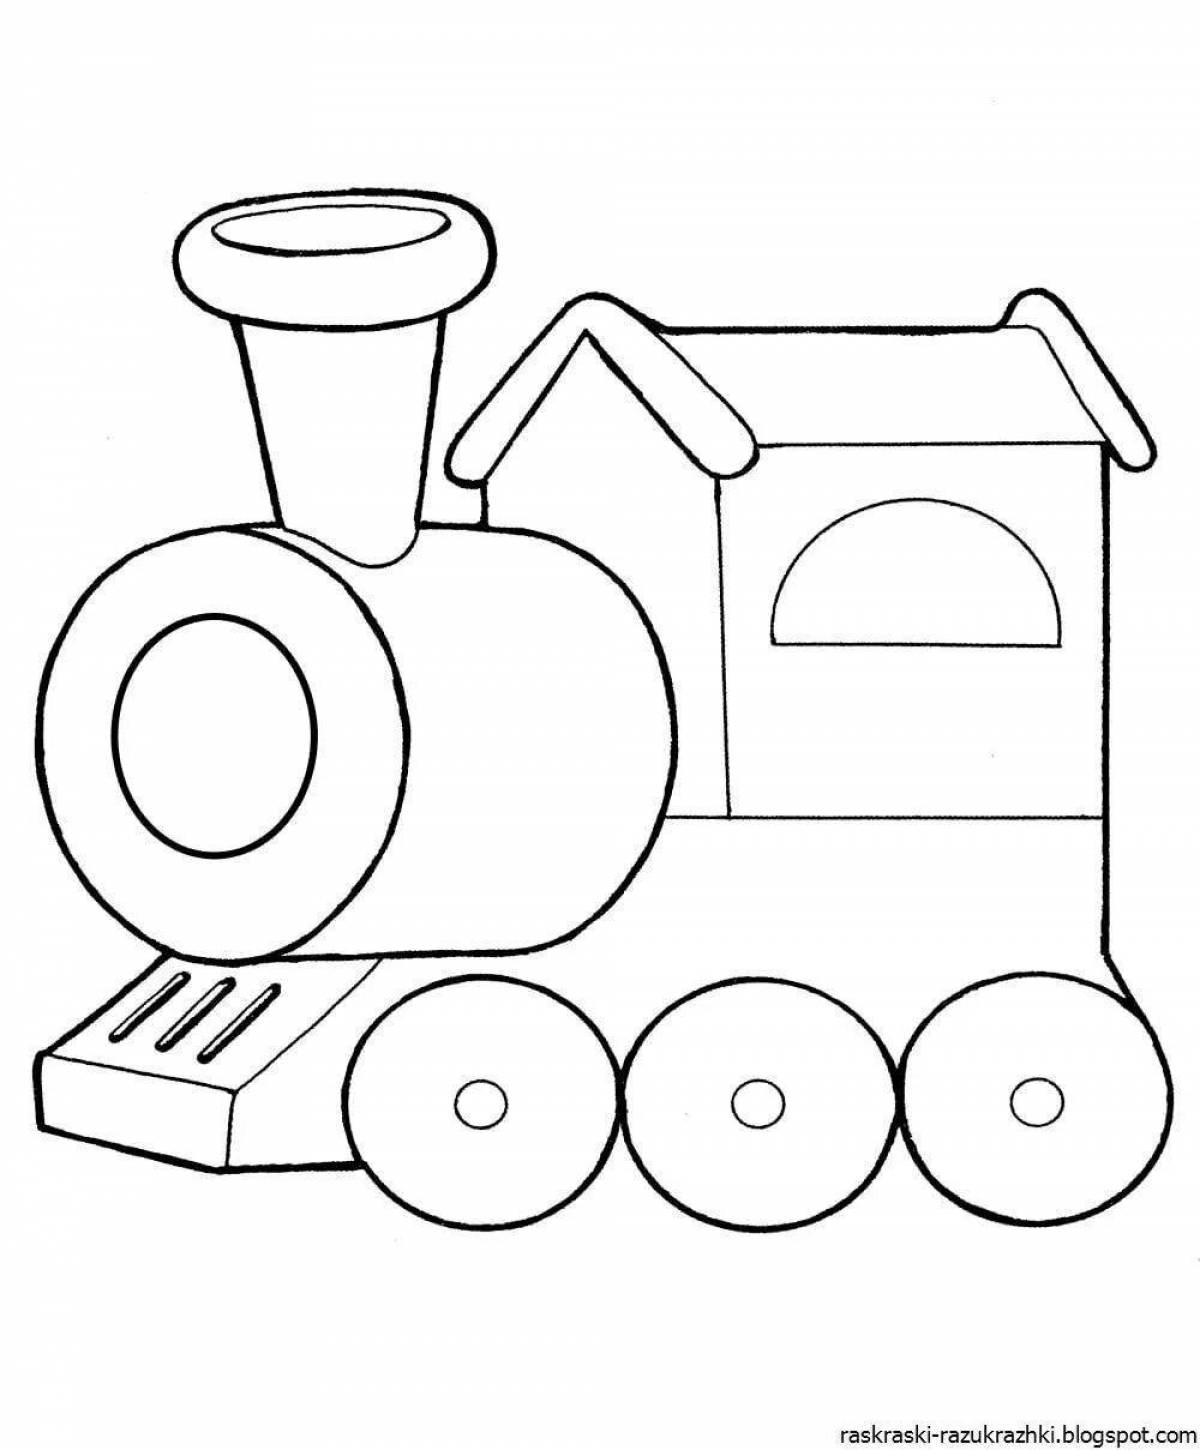 Coloring train for kids with bright colors